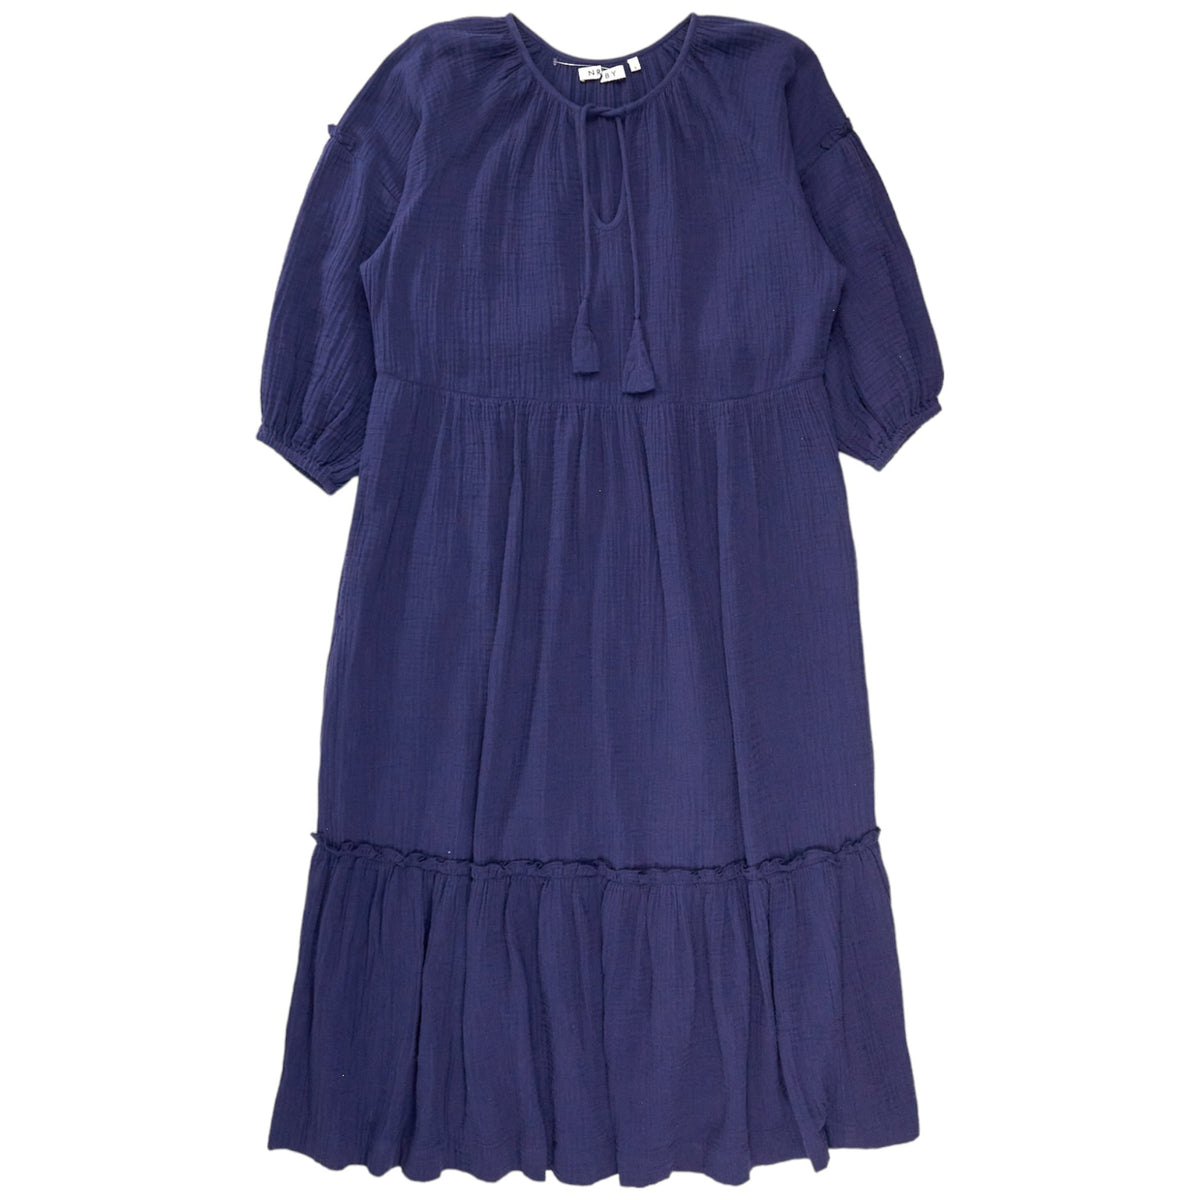 NRBY Navy Crinkle Cotton Dress